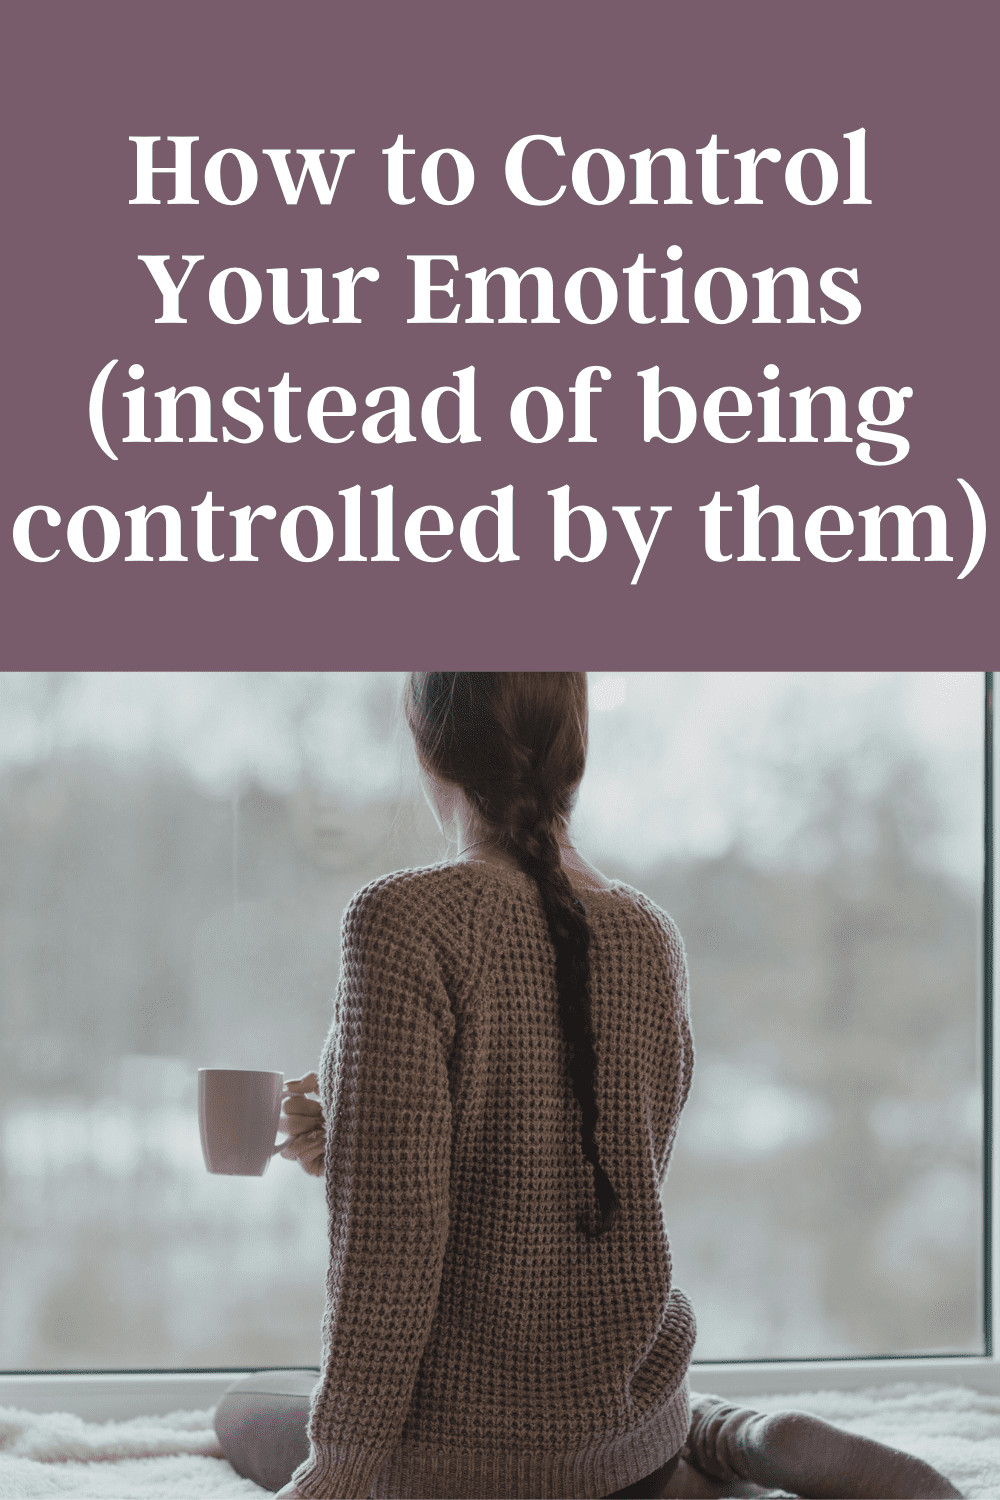 It is possible to learn how to manage overwhelming emotions during the most difficult seasons of life. Feeling overwhelmed by big emotions and negative thoughts is a common struggle when things aren't going well. With this easy-to-follow framework you can finally have peace during hard times by managing your emotions and thoughts.